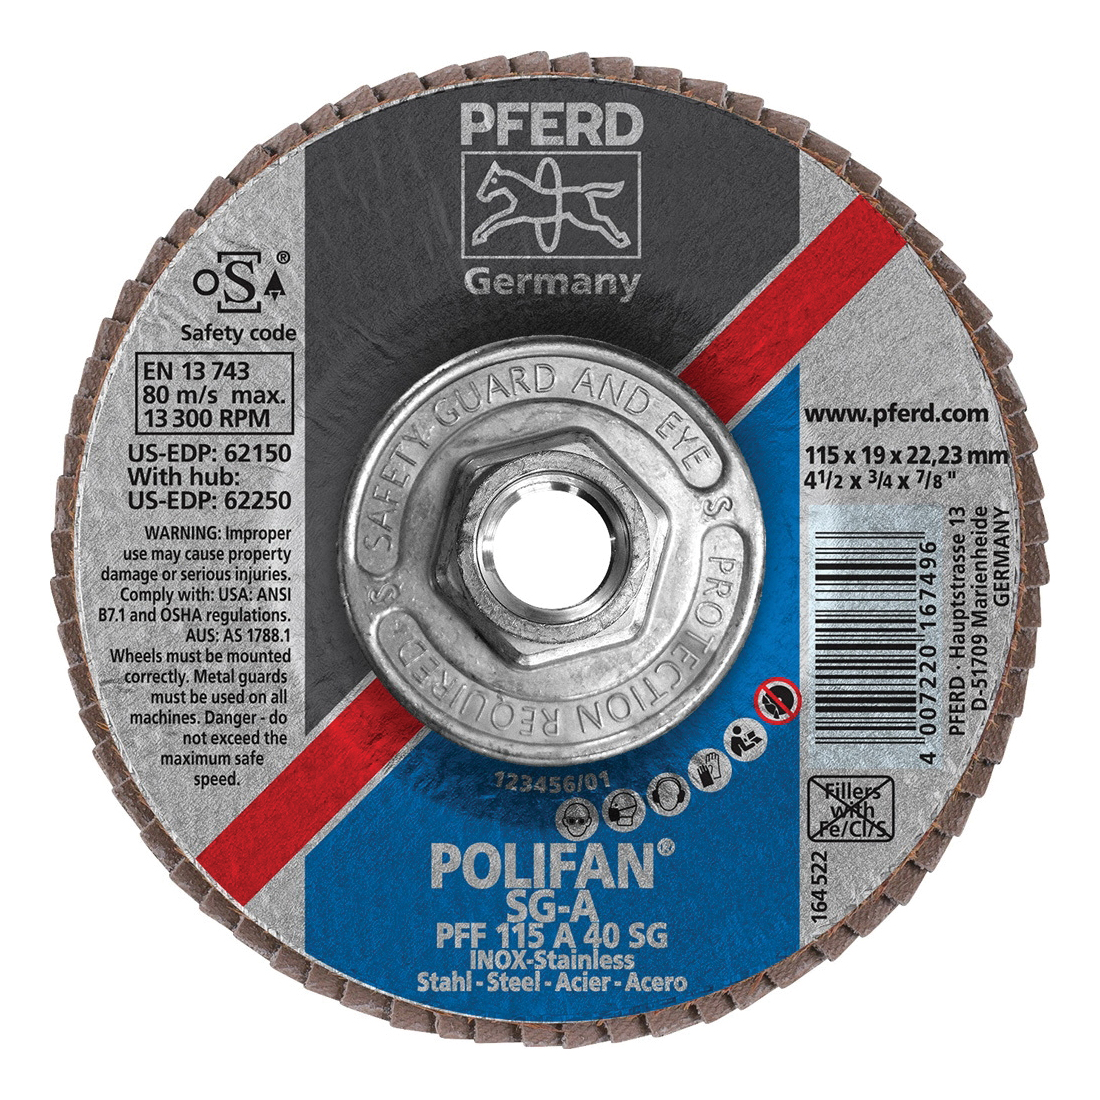 PFERD Polifan® 62250 Performance Line SG A Threaded Coated Abrasive Flap Disc, 4-1/2 in Dia, 40 Grit, Aluminum Oxide Abrasive, Type 27 Flat Disc